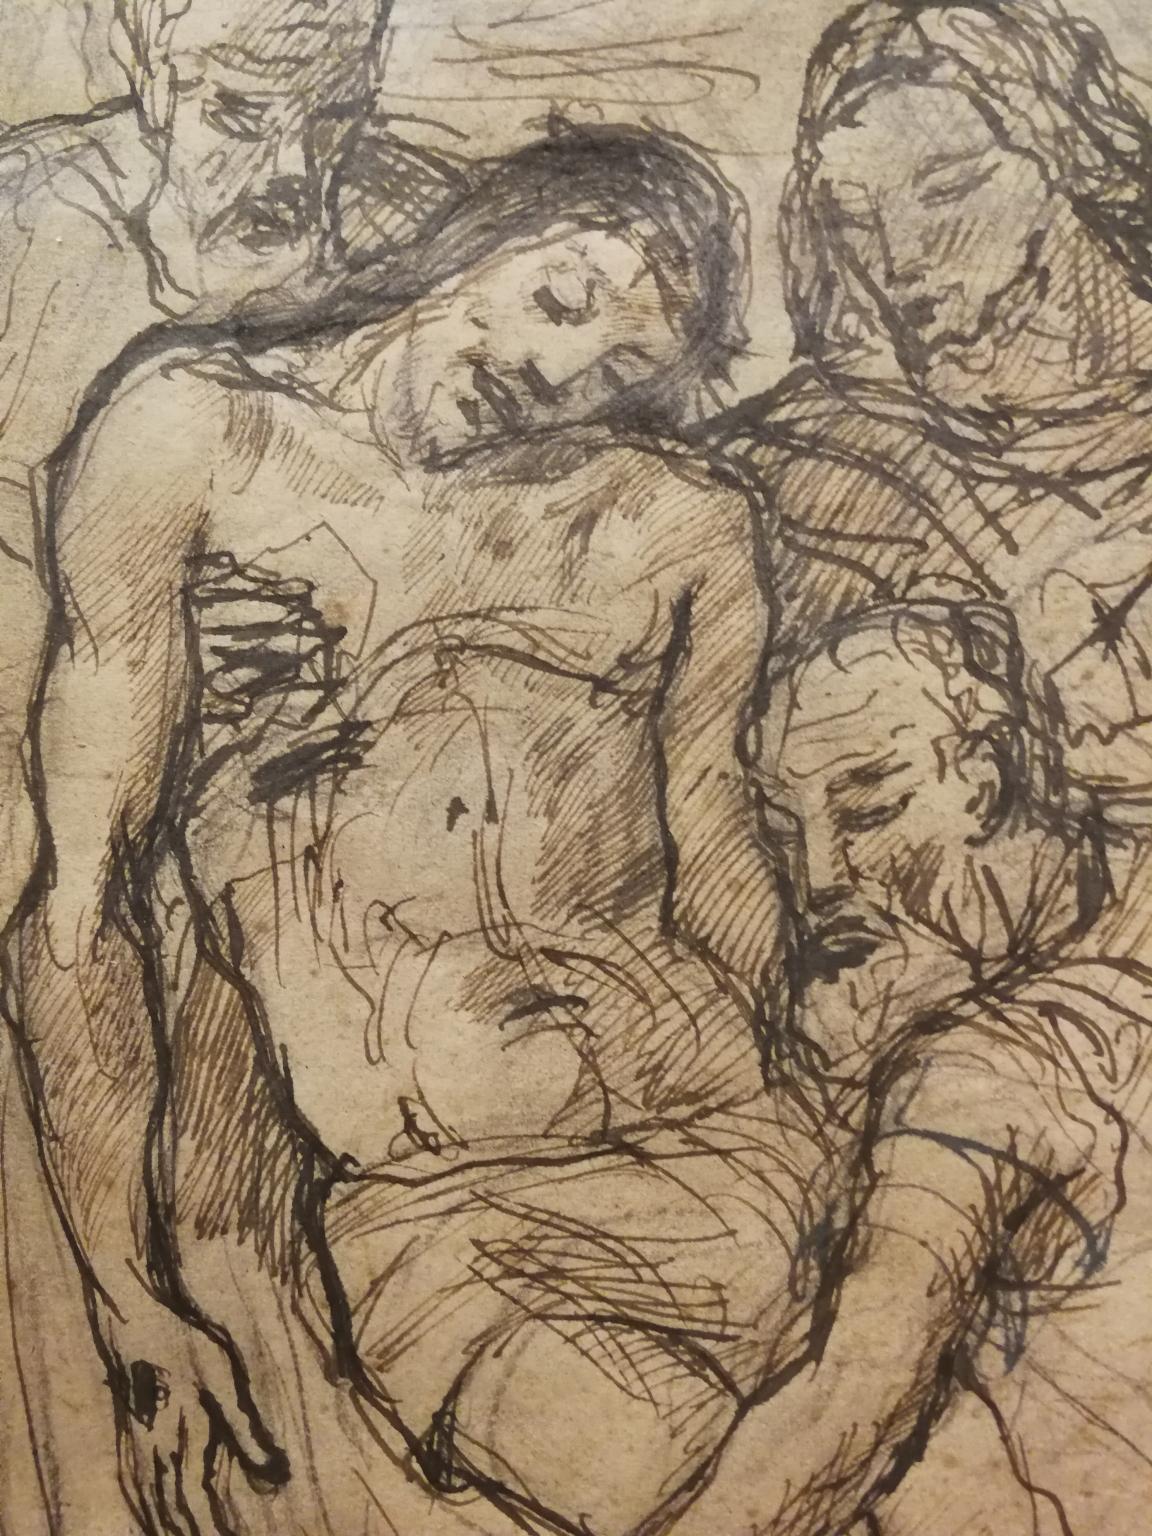 The drawing is signed on the bottom left G. Fraschetti, a Florentine artist, pupil of Giacomo Lolli, active mostly in Tuscany in the time between the 19th and 20th century and known for his unique figurative style, influenced just by his point of